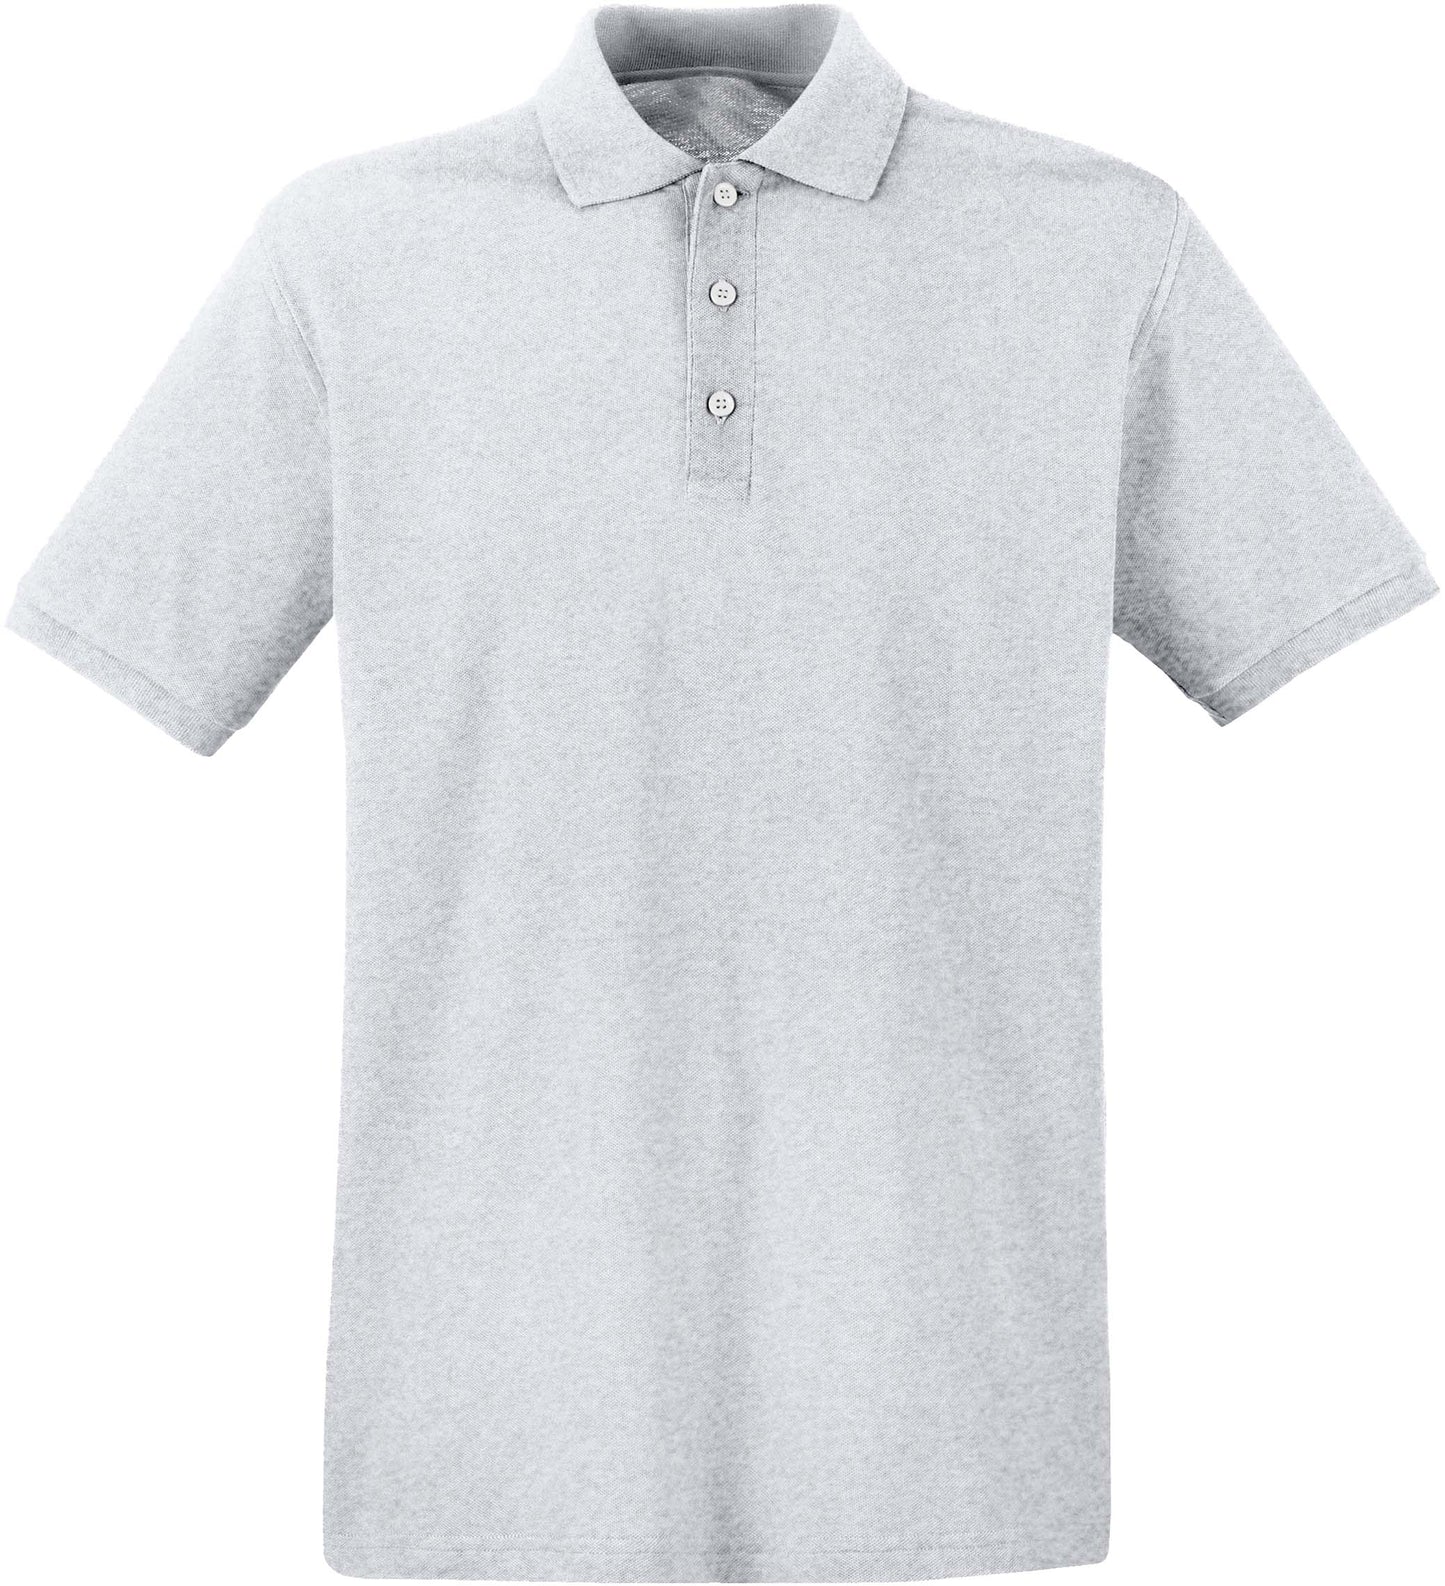 Workwear Logo Polo Unisex T-shirt Save £3 per item when ordering 5 or more!